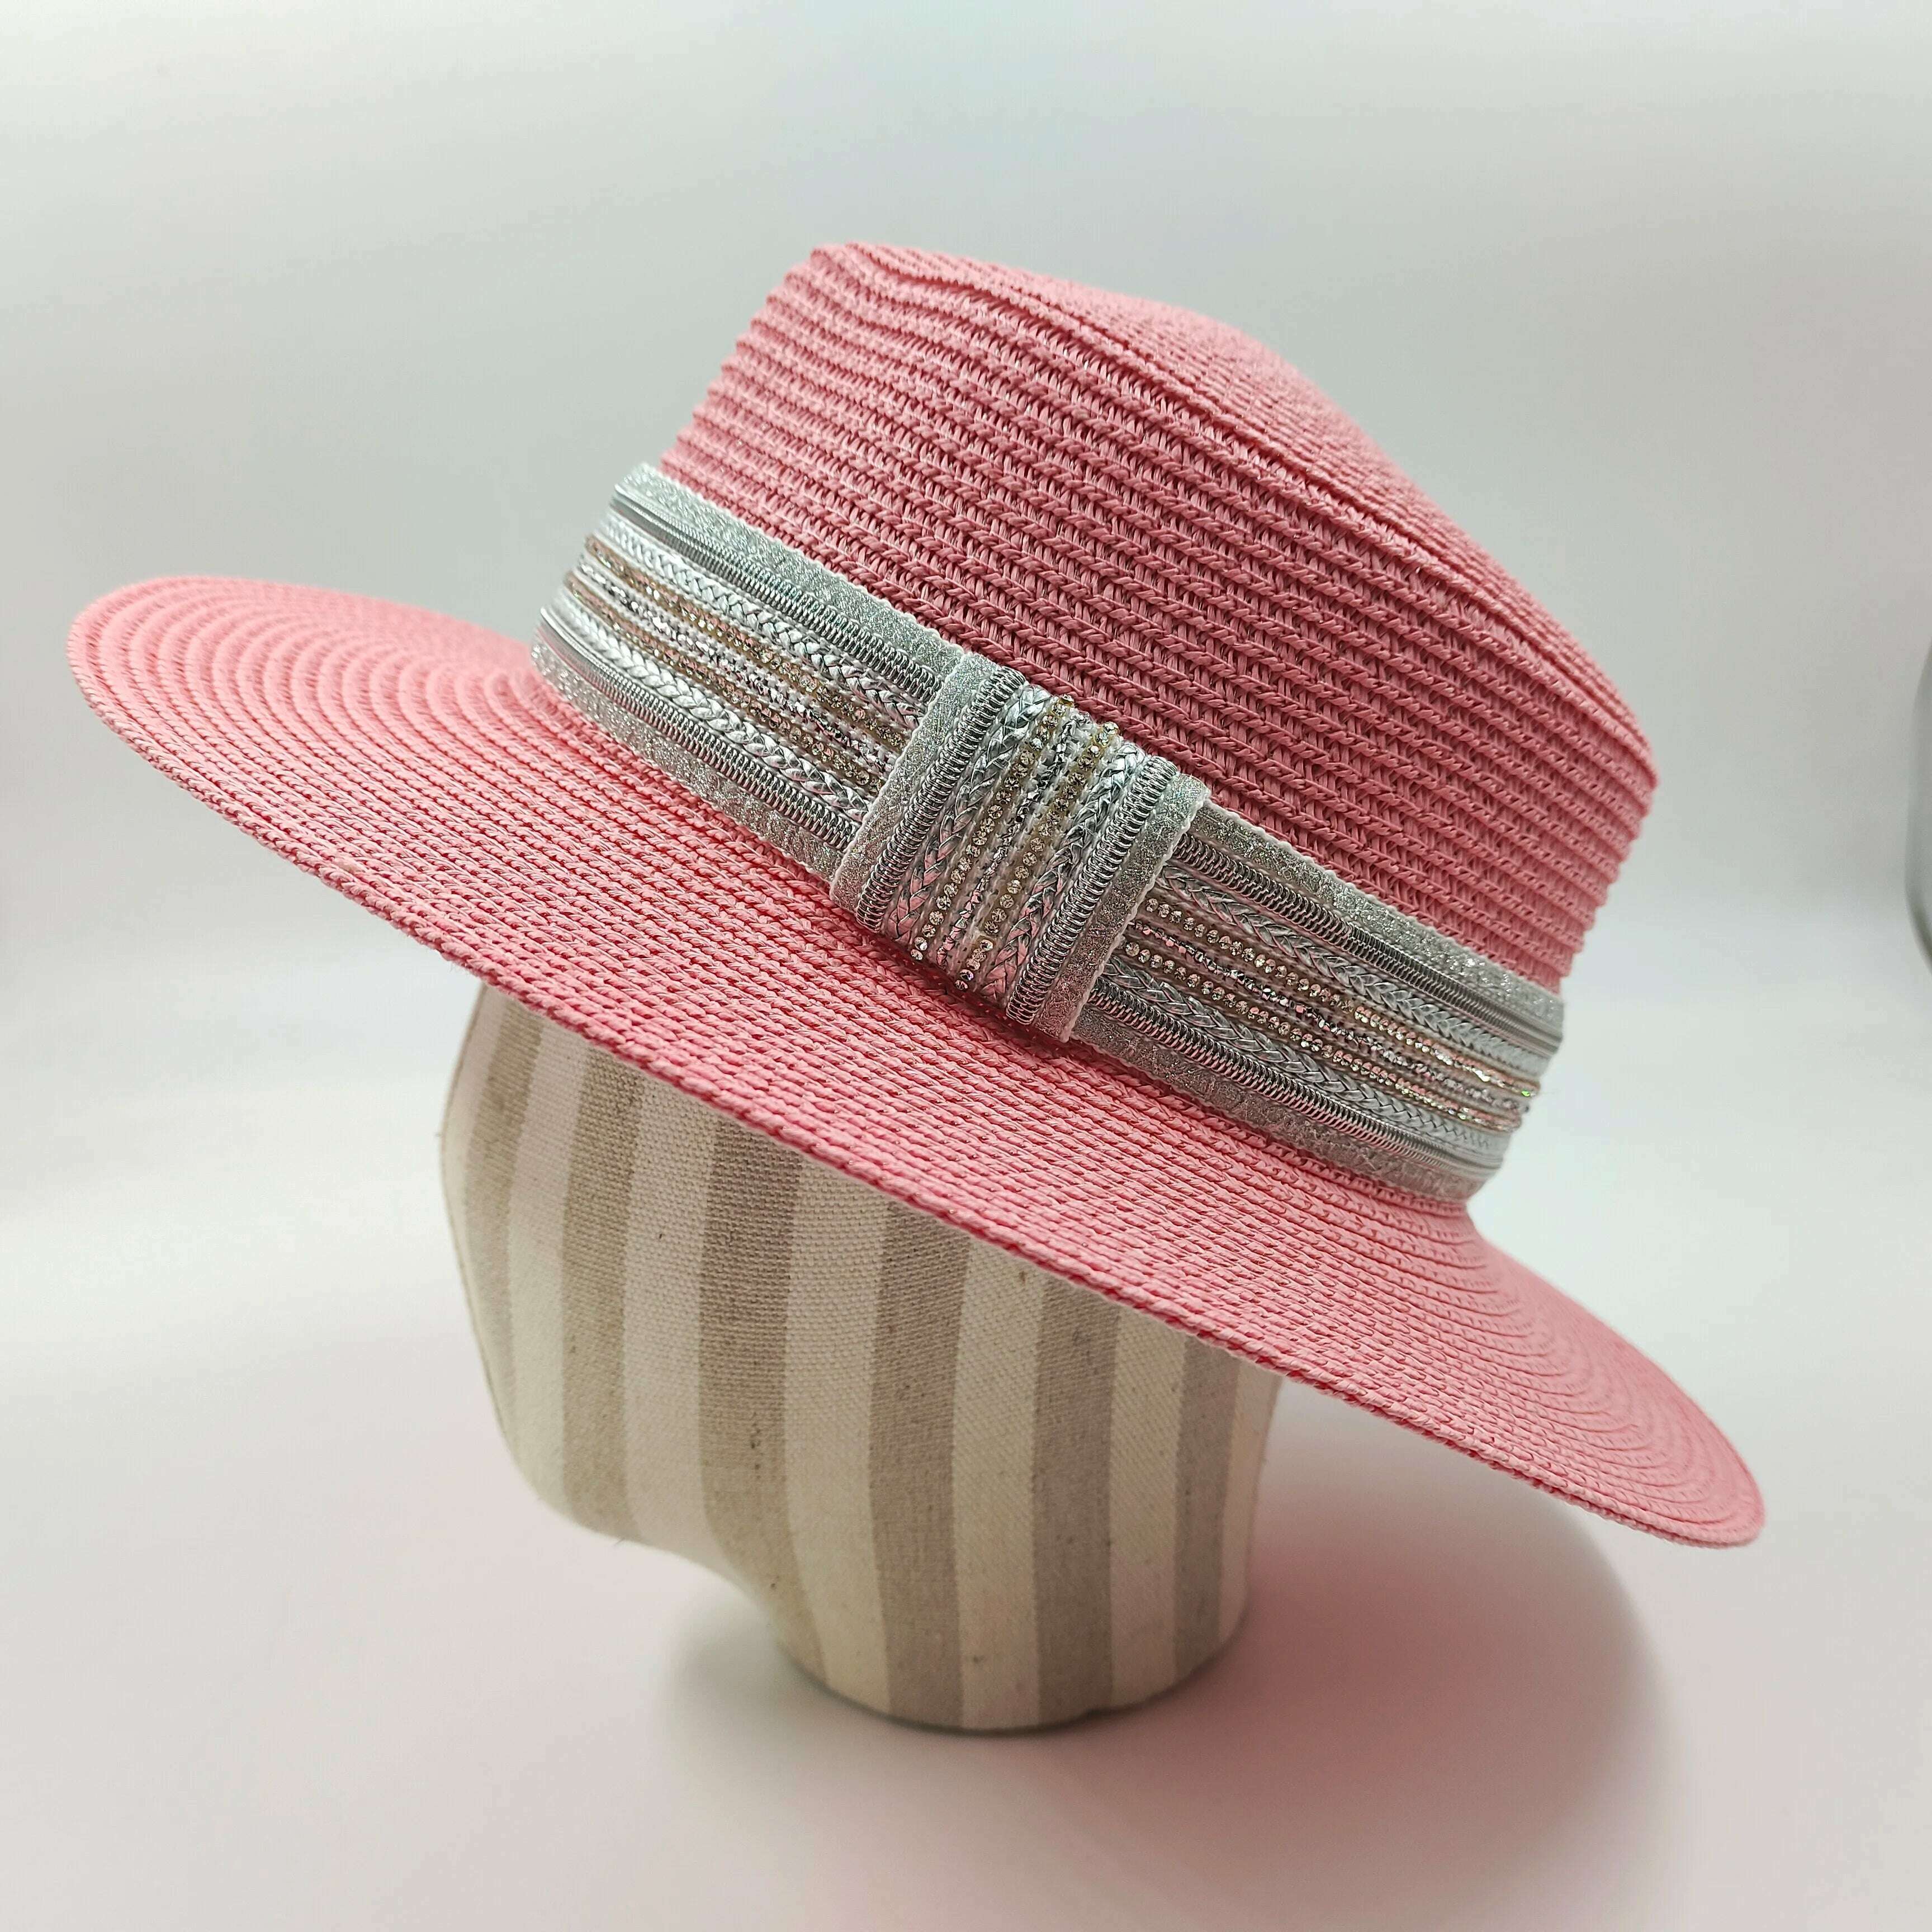 KIMLUD, women straw hat  Flat Top Straw Hat Vacation Casual Shopping Beach Hats for Woman Hats for girls Church Courtesy Panama Sun Hat, 43 / M 56-58CM, KIMLUD Womens Clothes